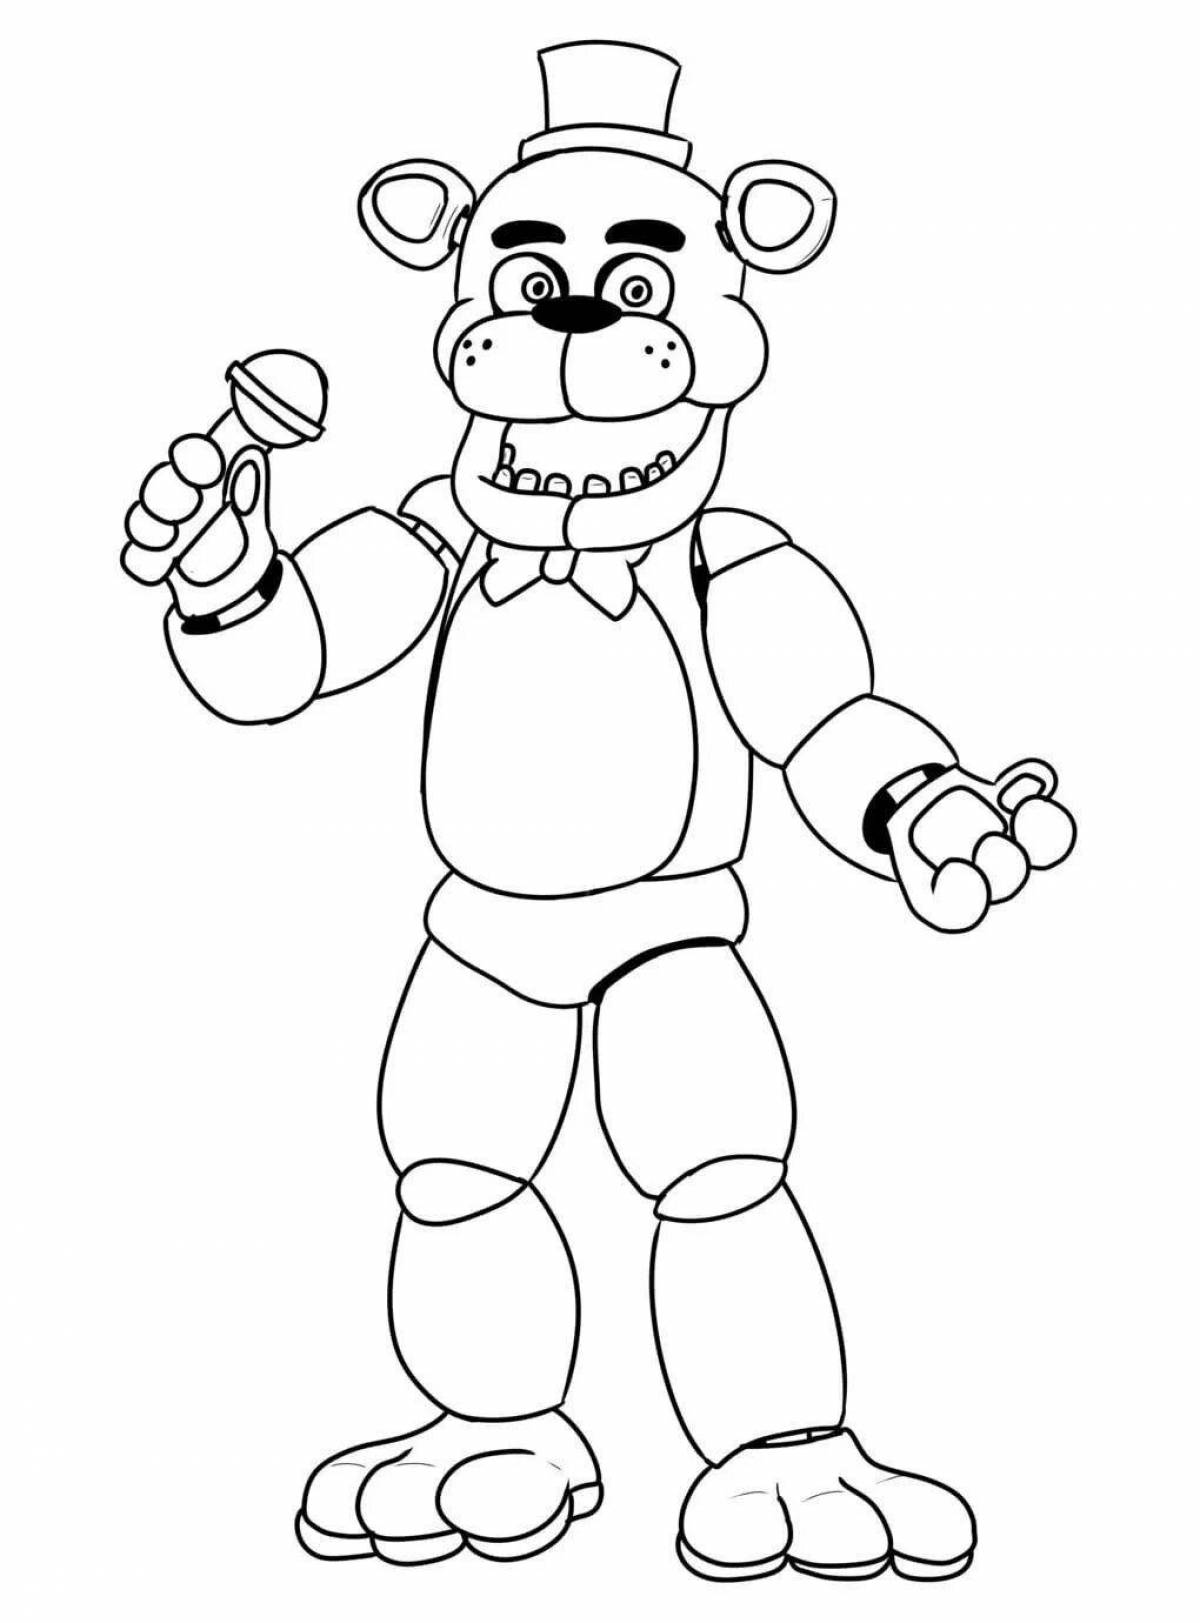 Tempting freddy fighttime coloring page